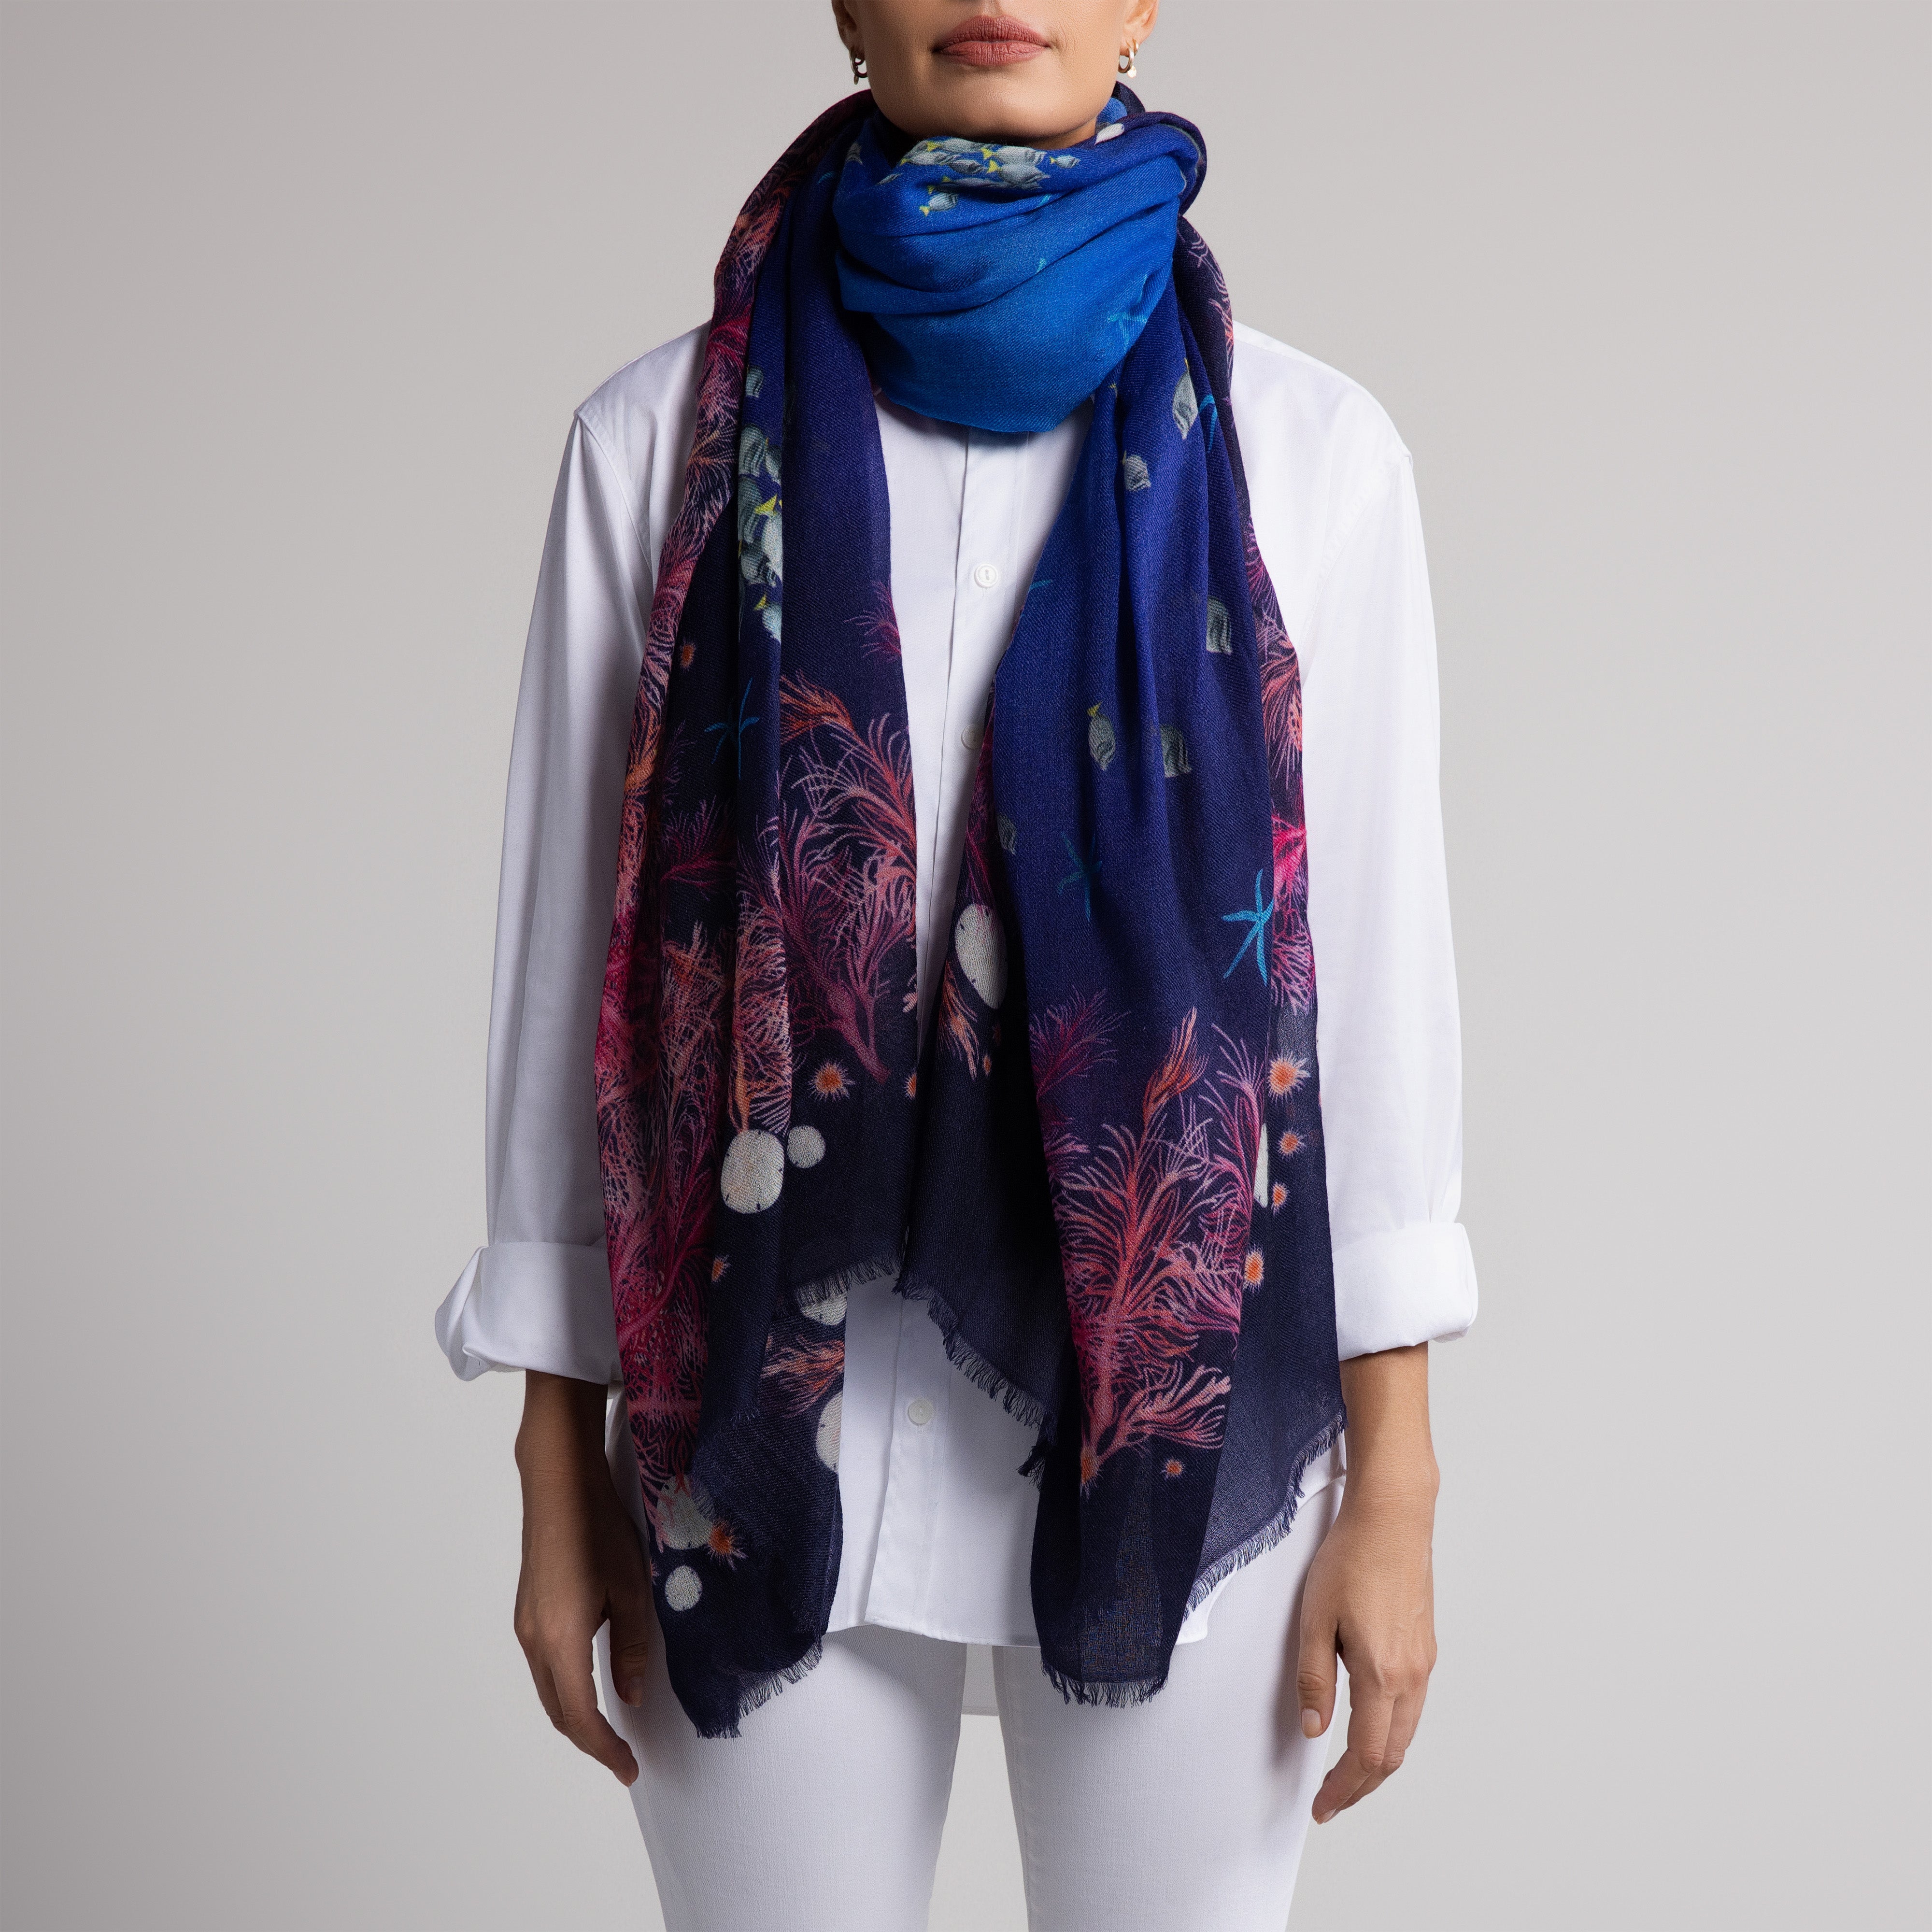 Galapagos Starfish 100% Cashmere Scarf in Blue